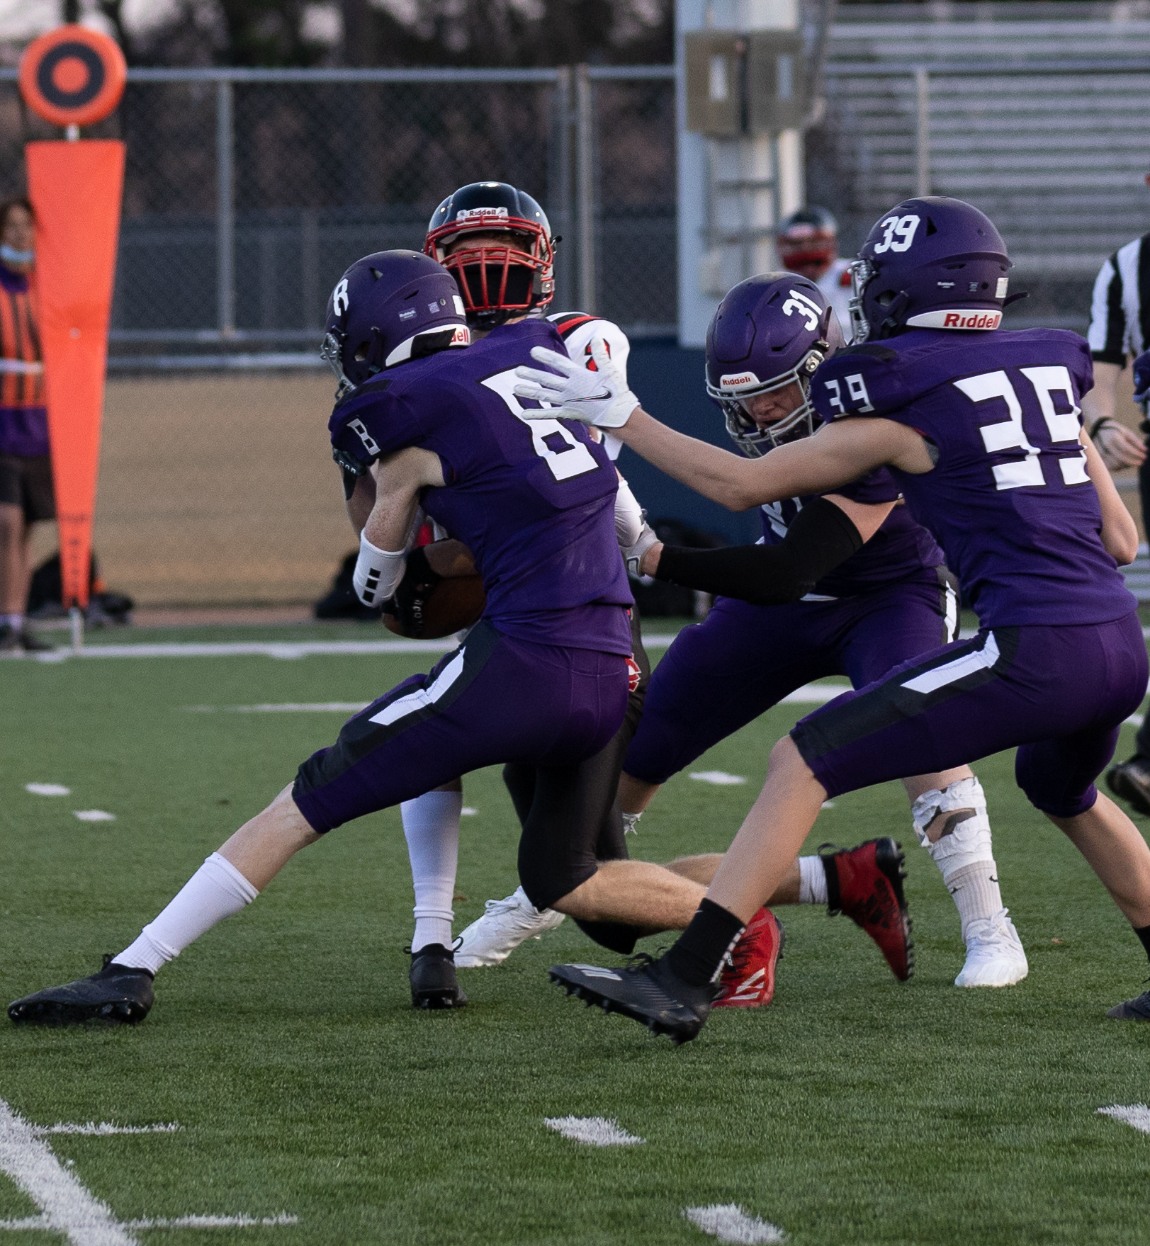 Eau-Claire-Memorial-JV-Football-LaCrosse-Central-at-Home-3-29-21-1501